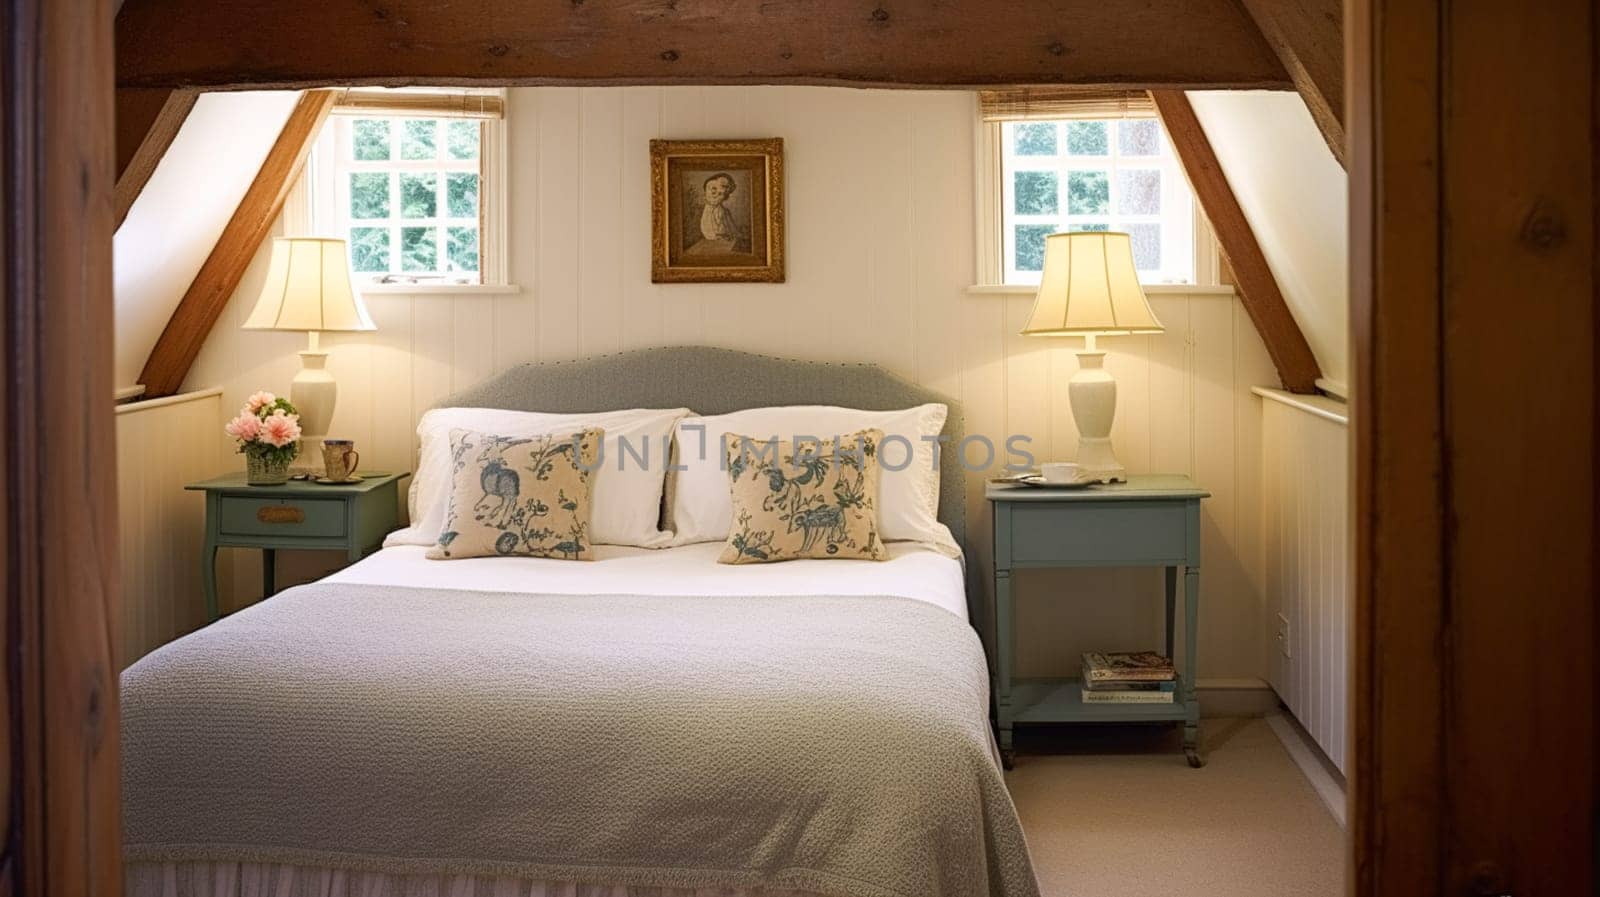 Farmhouse bedroom decor, interior design and home decor, bed with elegant bedding and bespoke furniture, English country house, holiday rental and cottage style inspiration